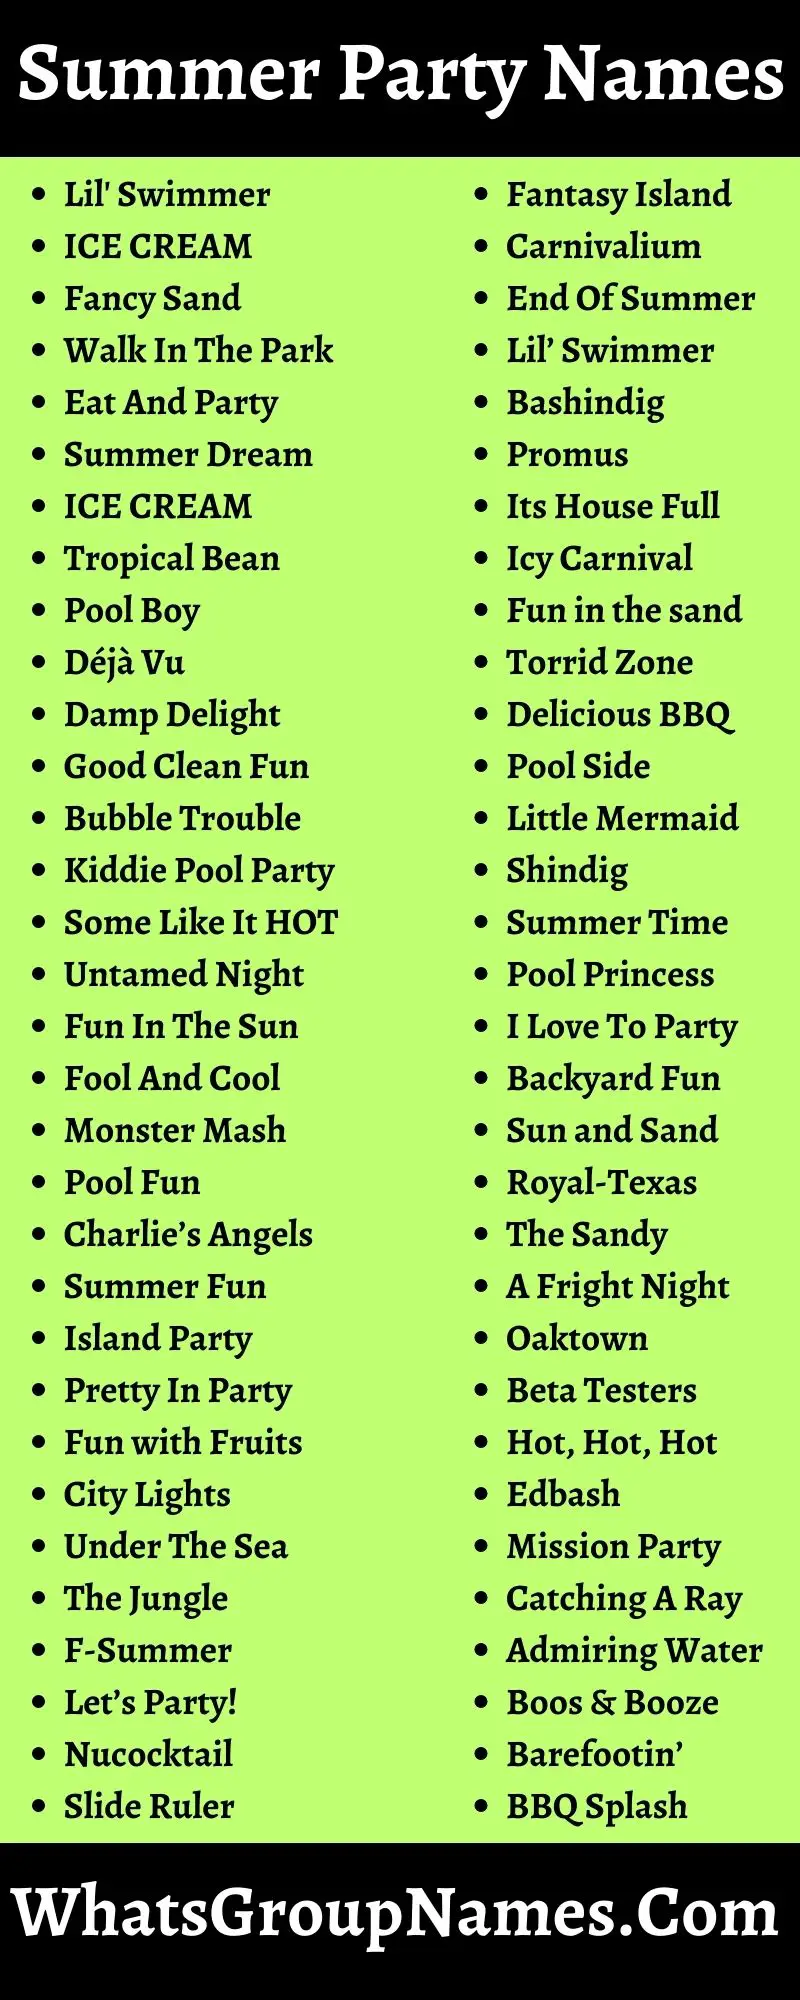 Summer Party Names